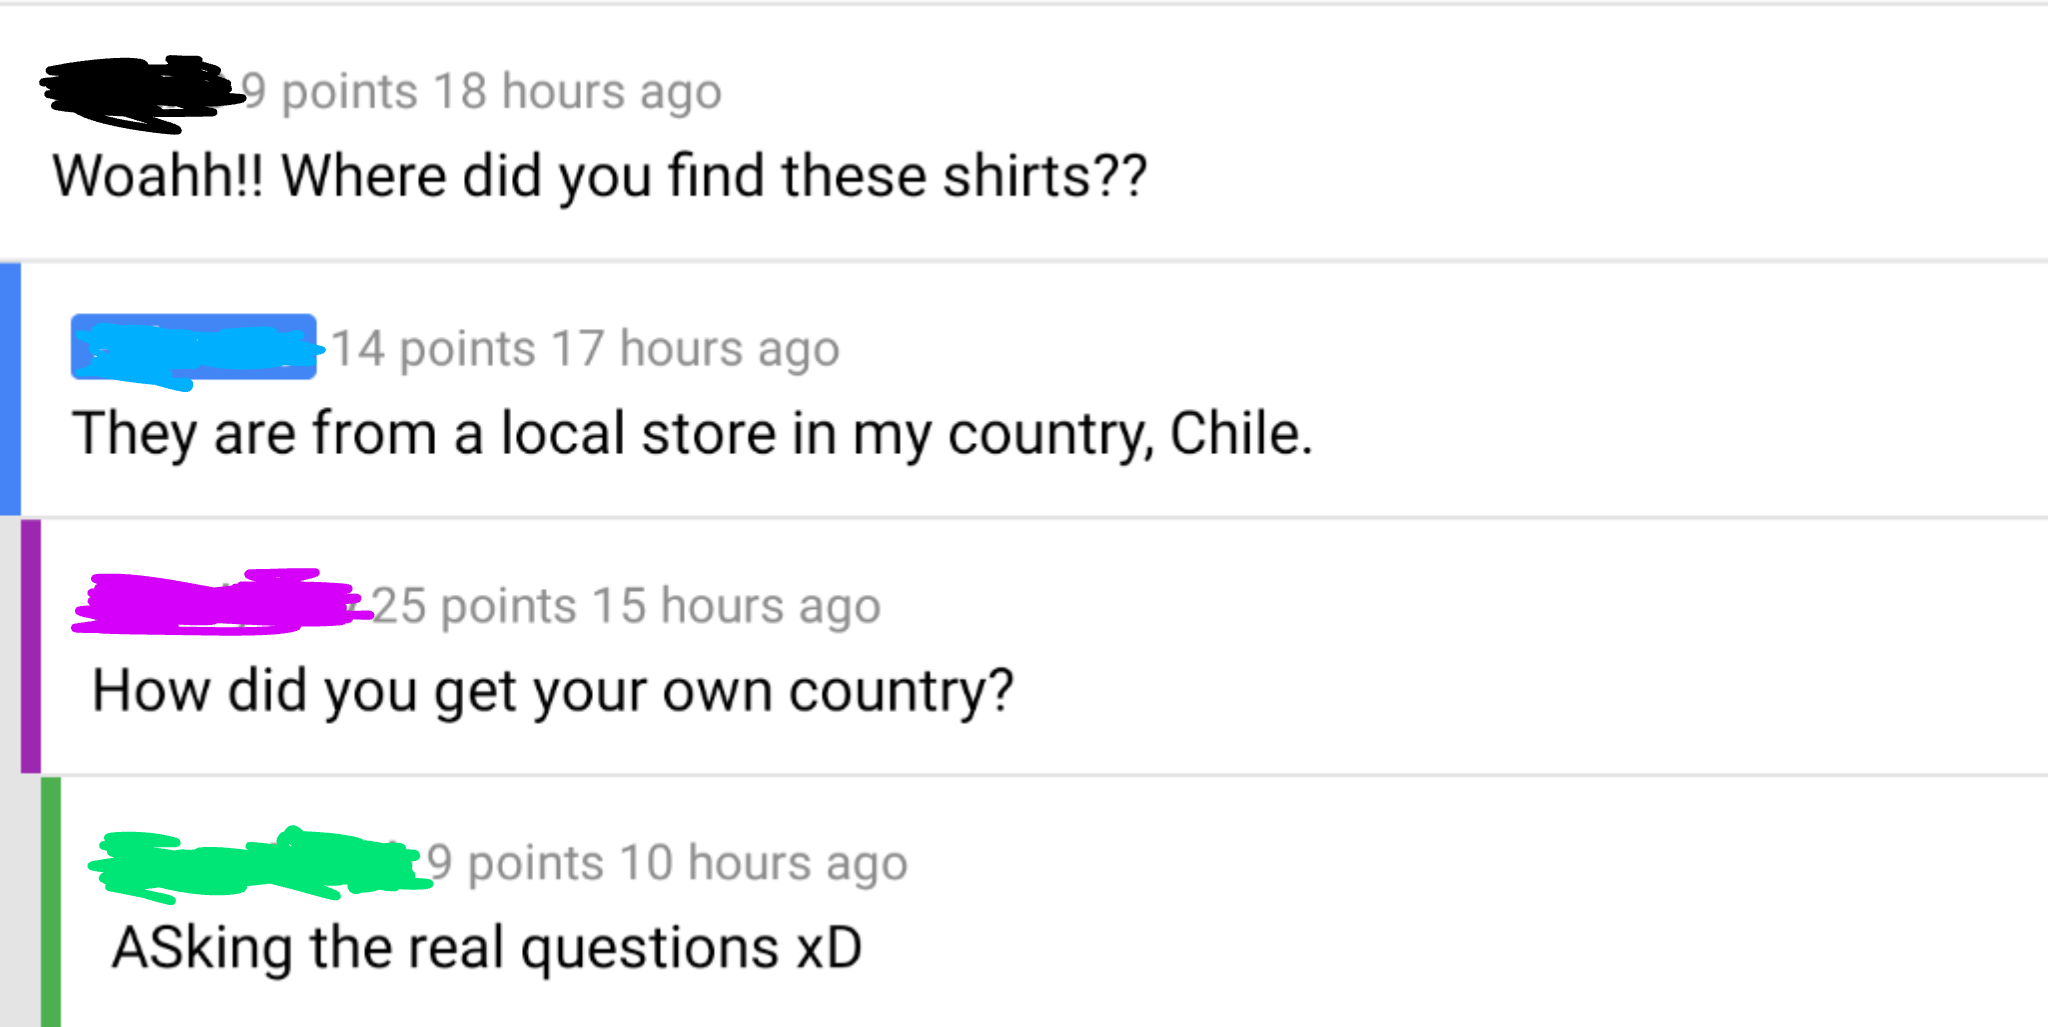 angle - 29 points 18 hours ago Woahh!! Where did you find these shirts?? 14 points 17 hours ago They are from a local store in my country, Chile. 325 points 15 hours ago How did you get your own country? 19 points 10 hours ago Asking the real questions xD